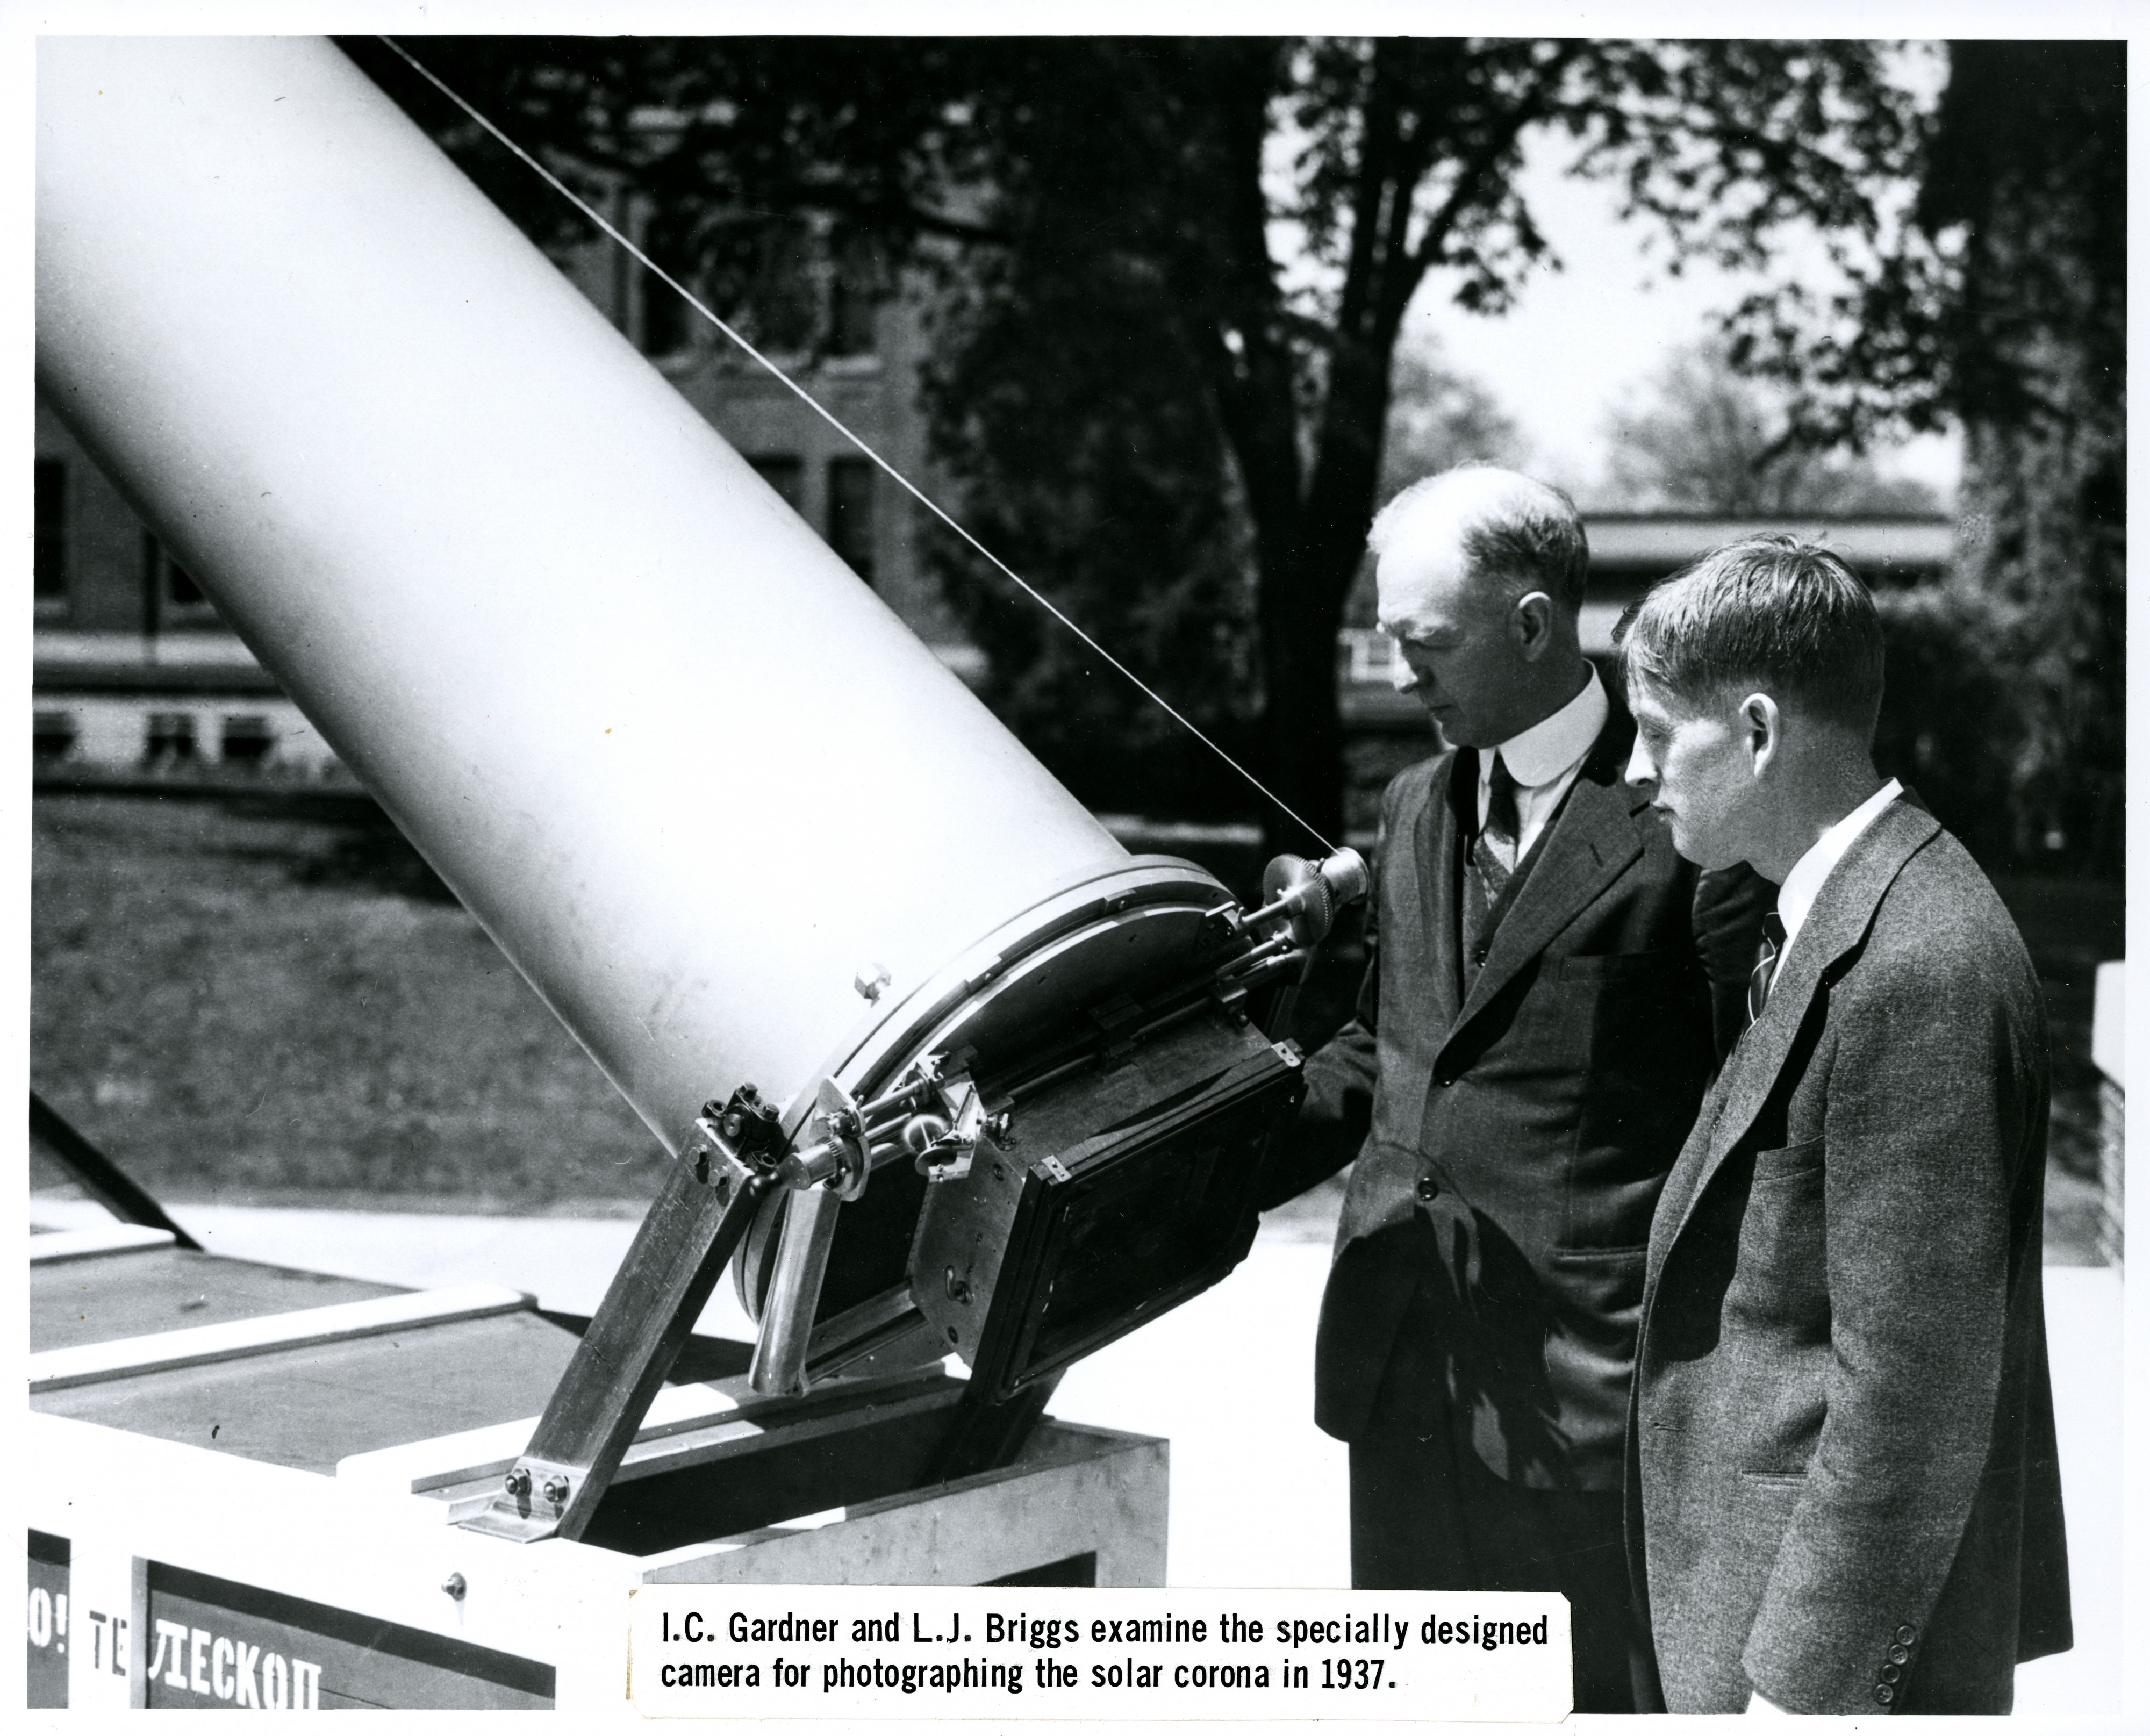 I. C. Gardner and L. J. Briggs examine the specially designed camera for photographing the solar corona in 1937